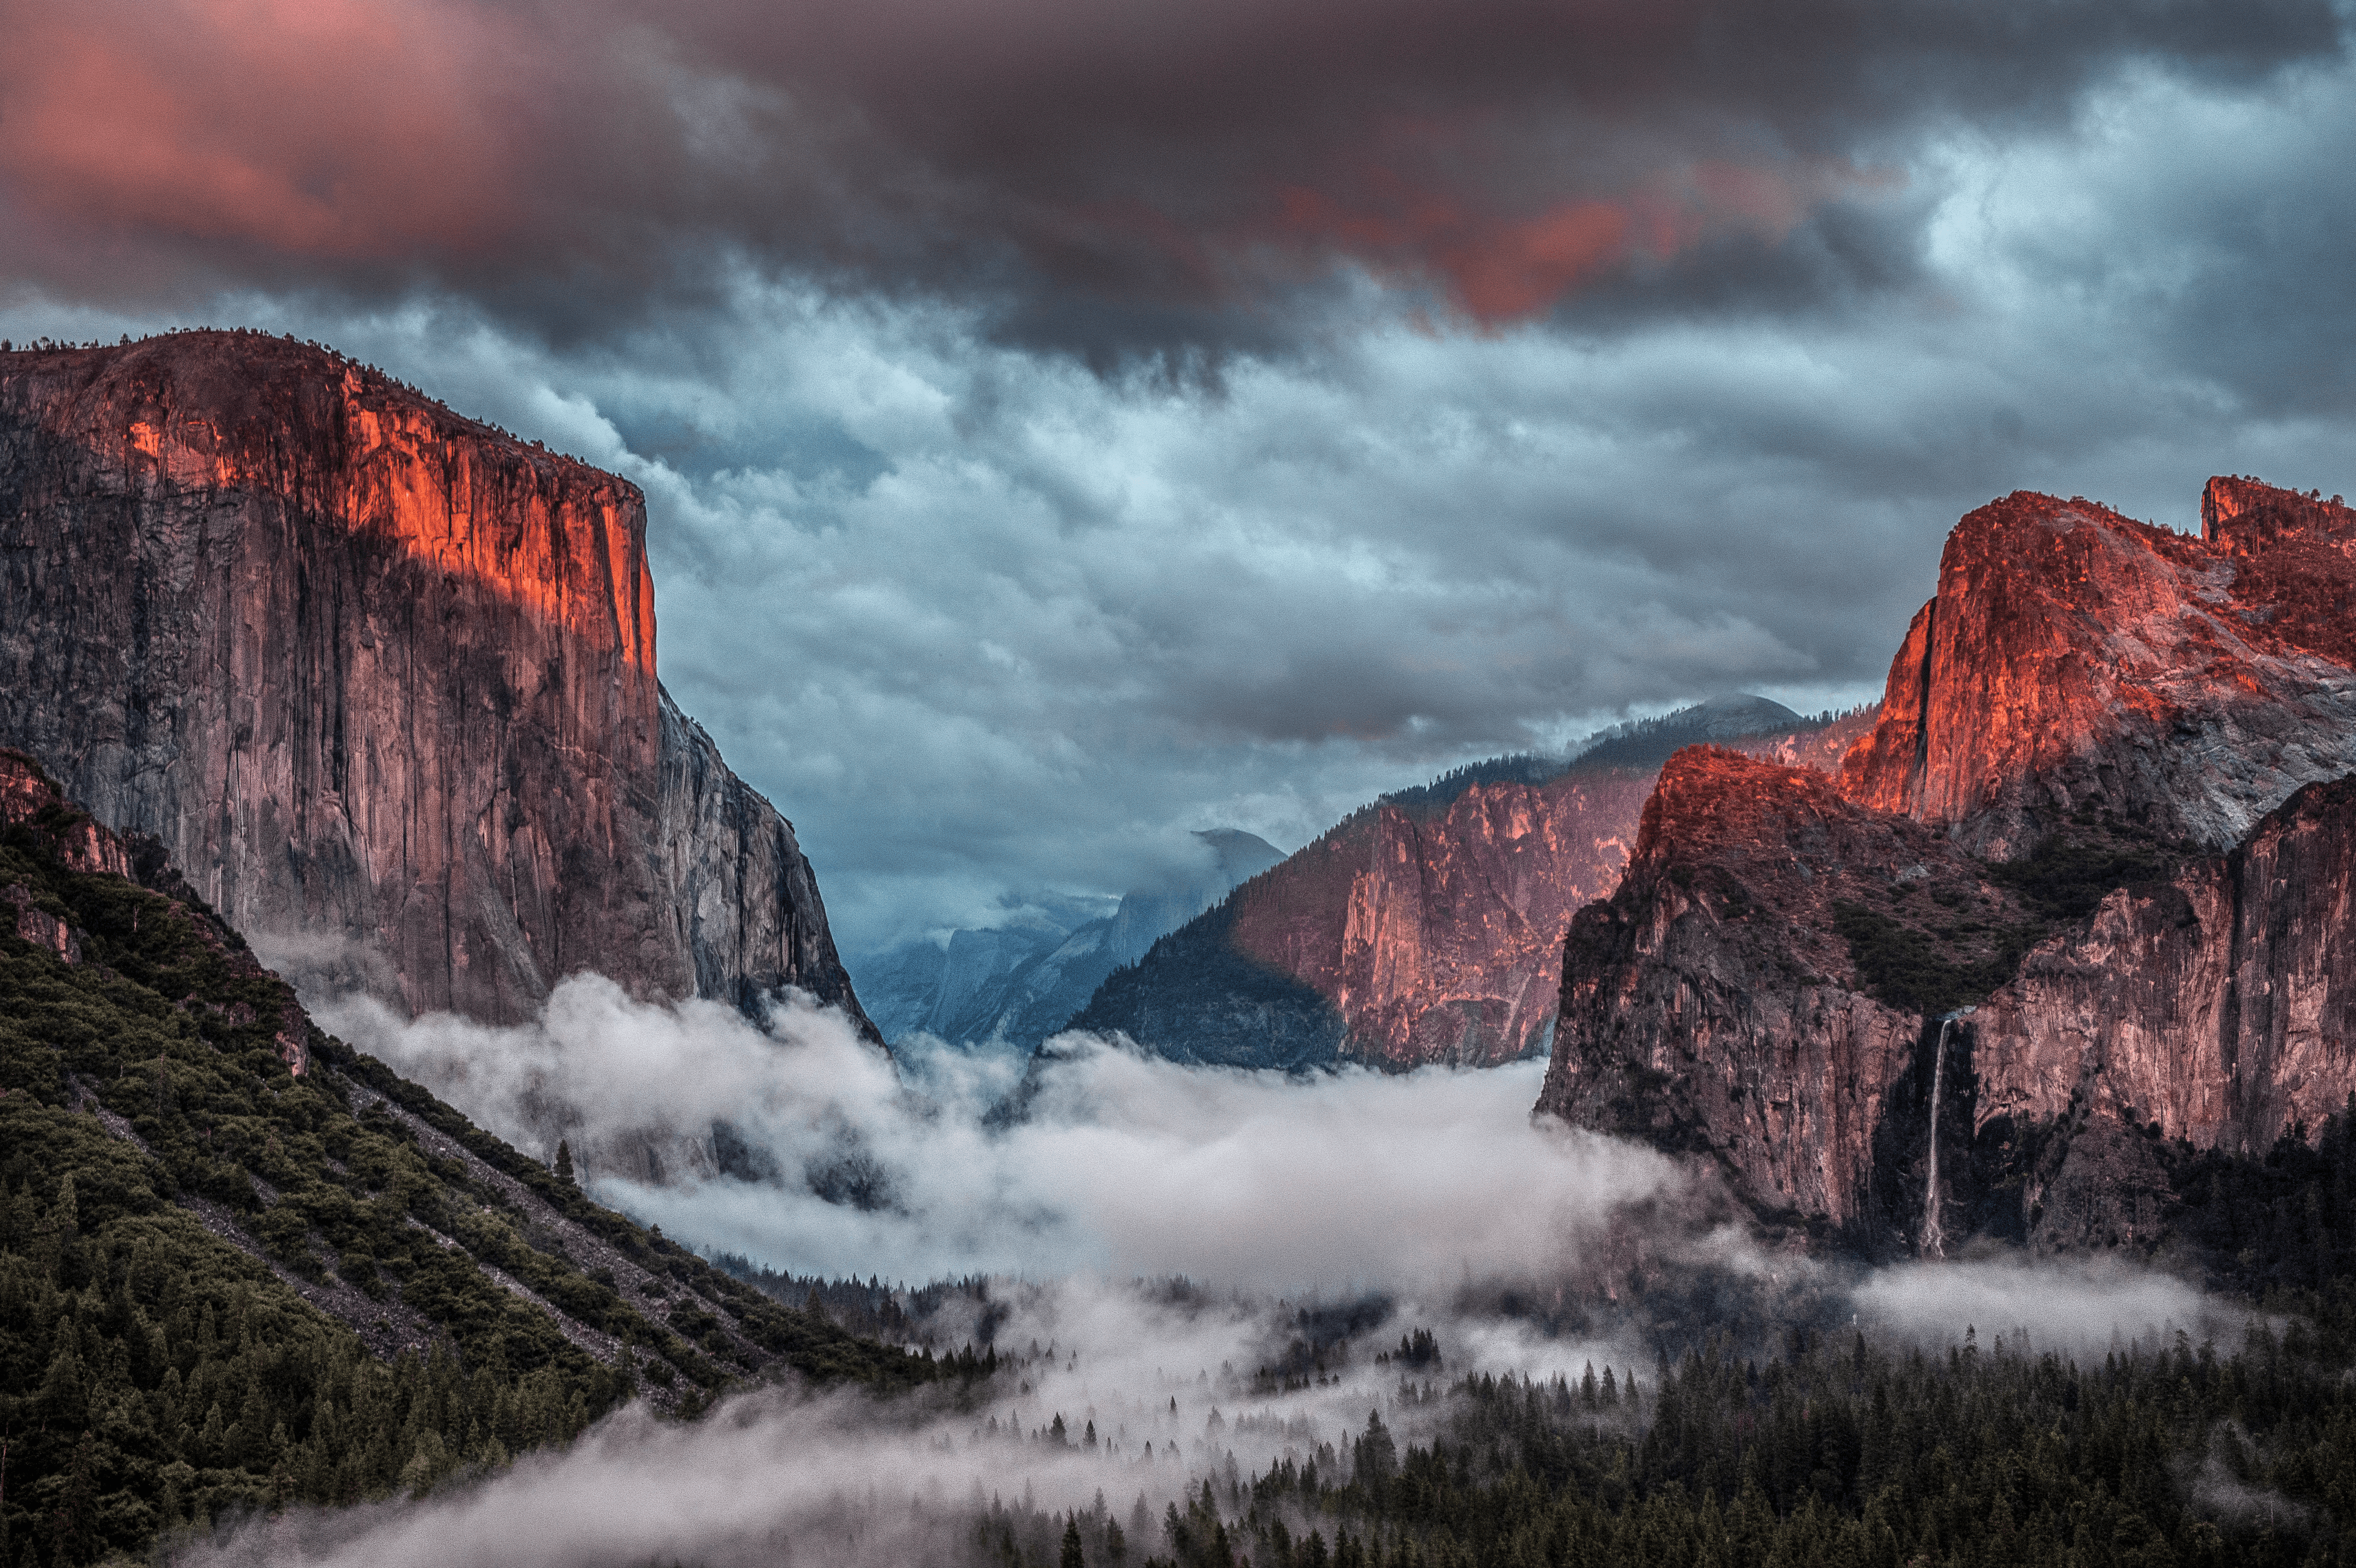 All Storms Pass - Yosemite Valley